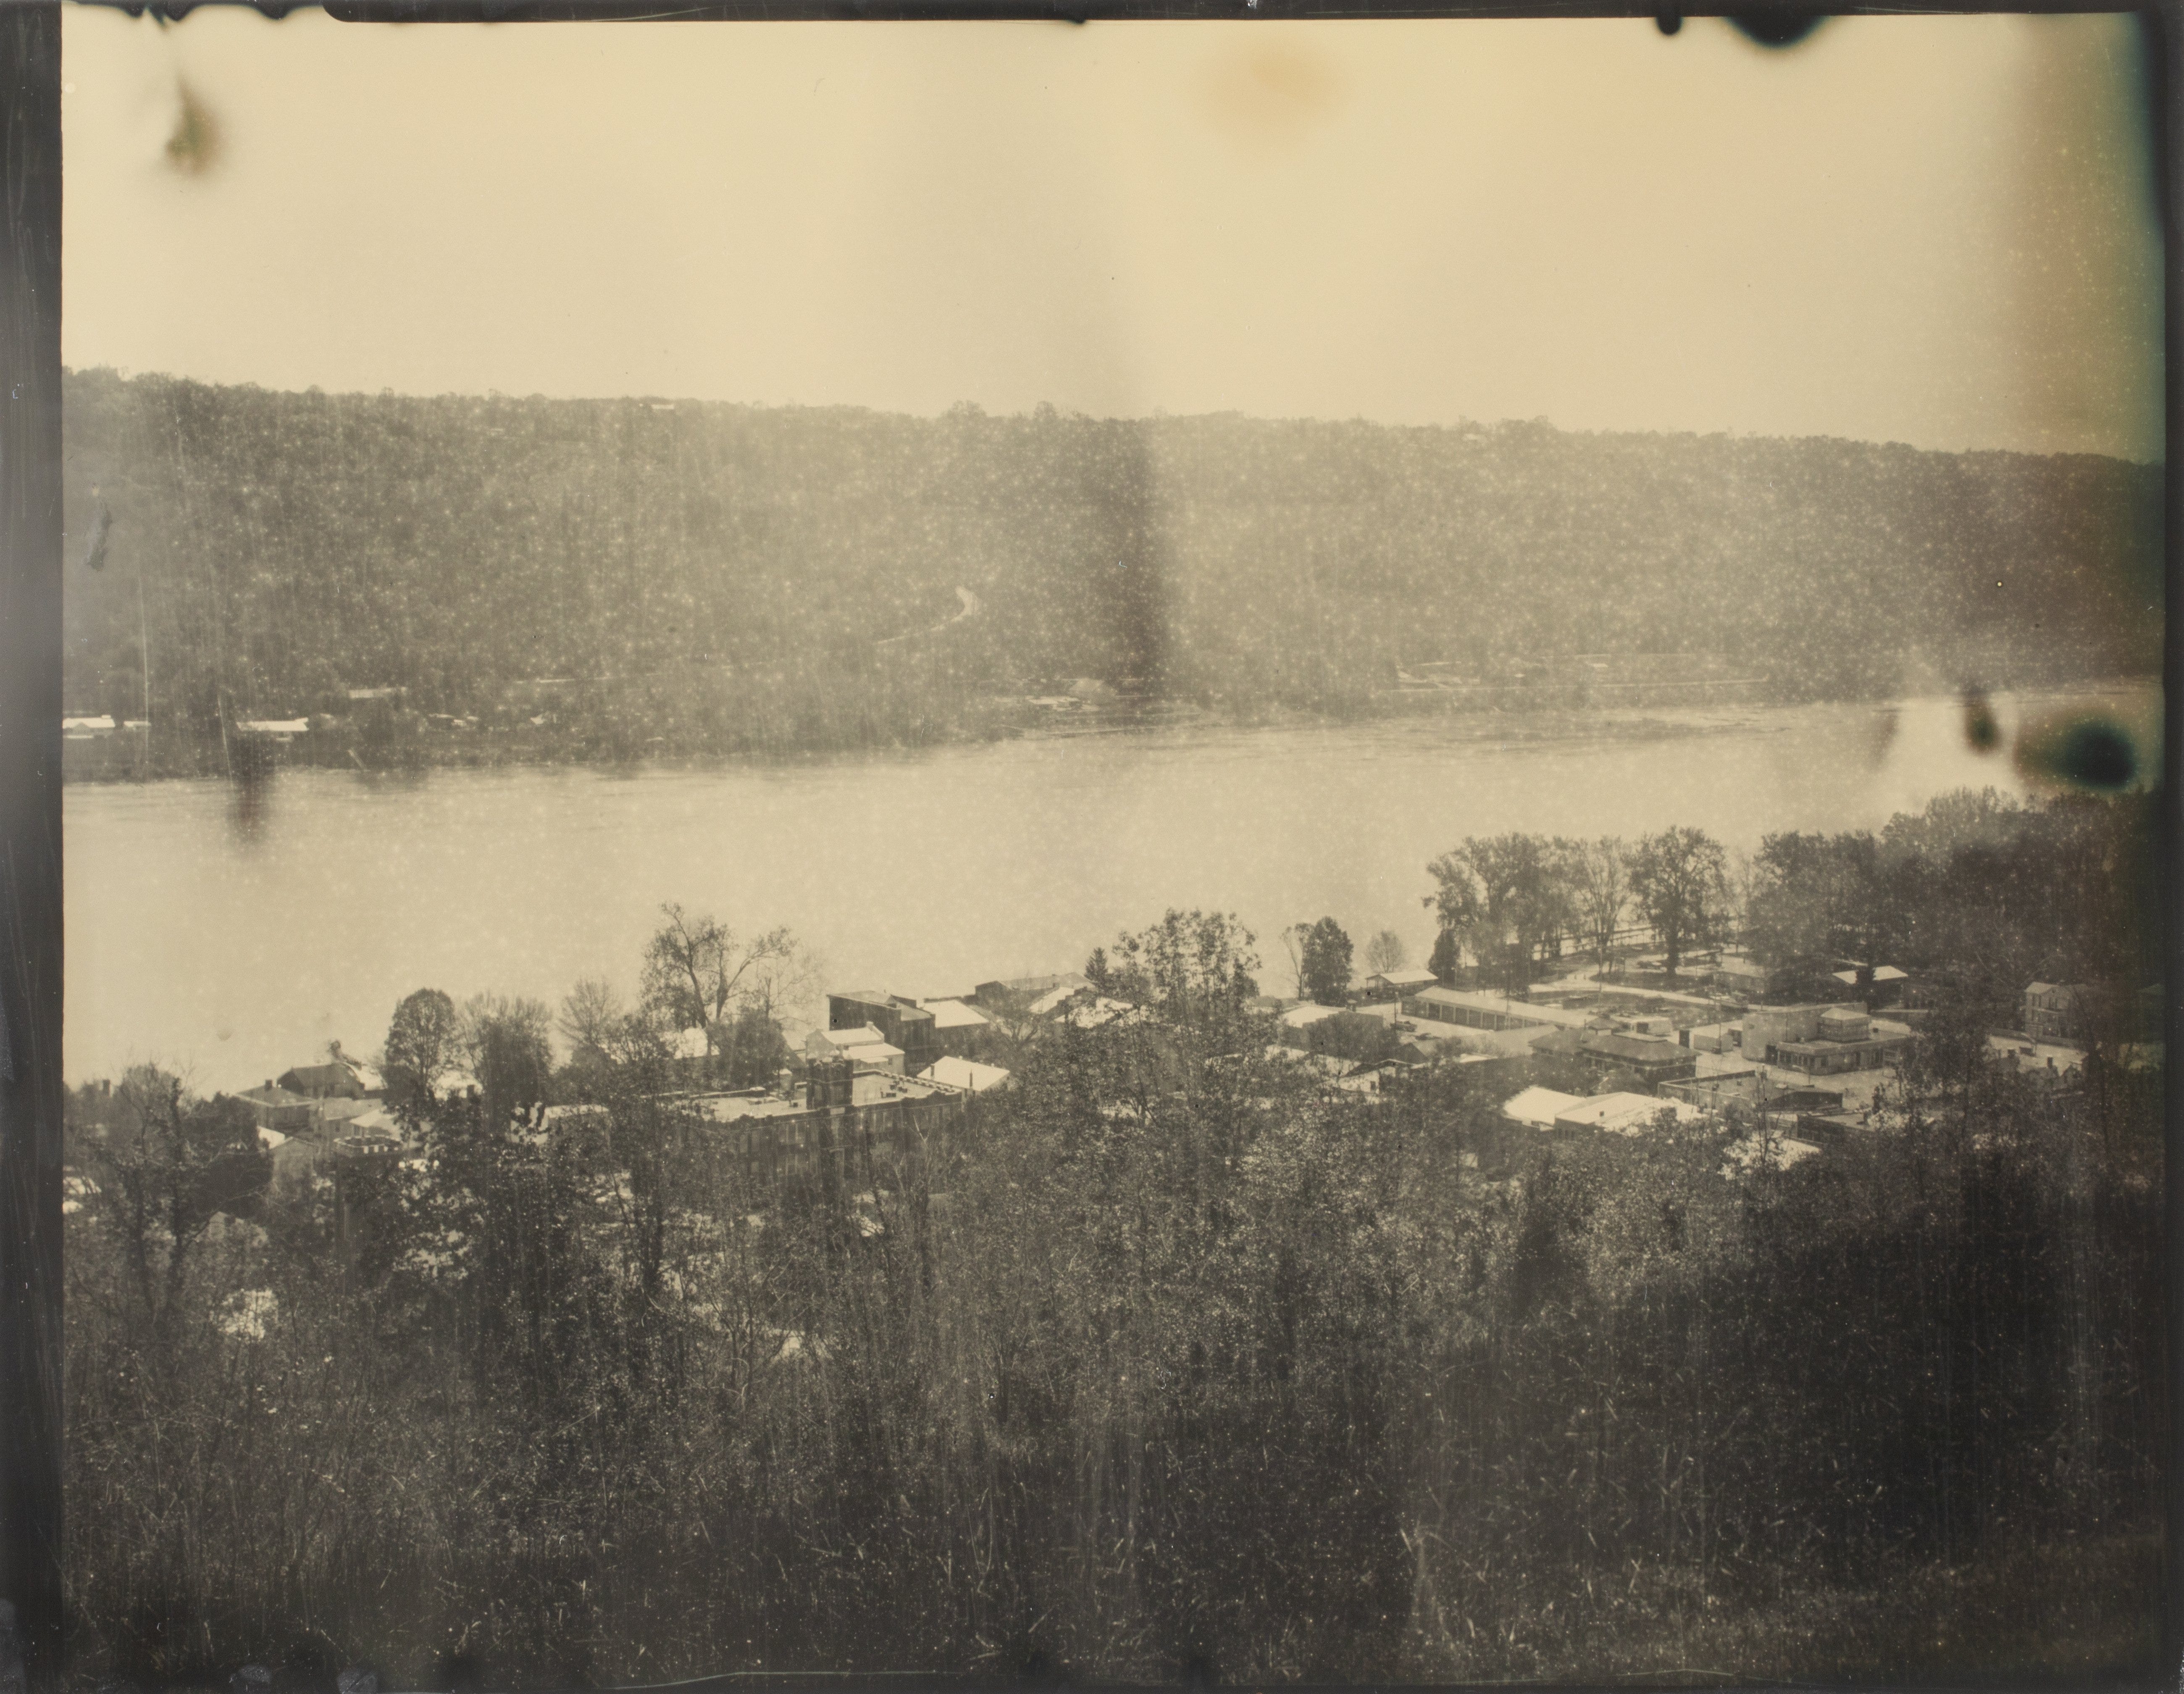 Kentucky and the Ohio River seen from Rankin Hill. The home of abolitionist Rev. John Rankin sat at the top of the hill and was a known stop on the Underground Railroad.